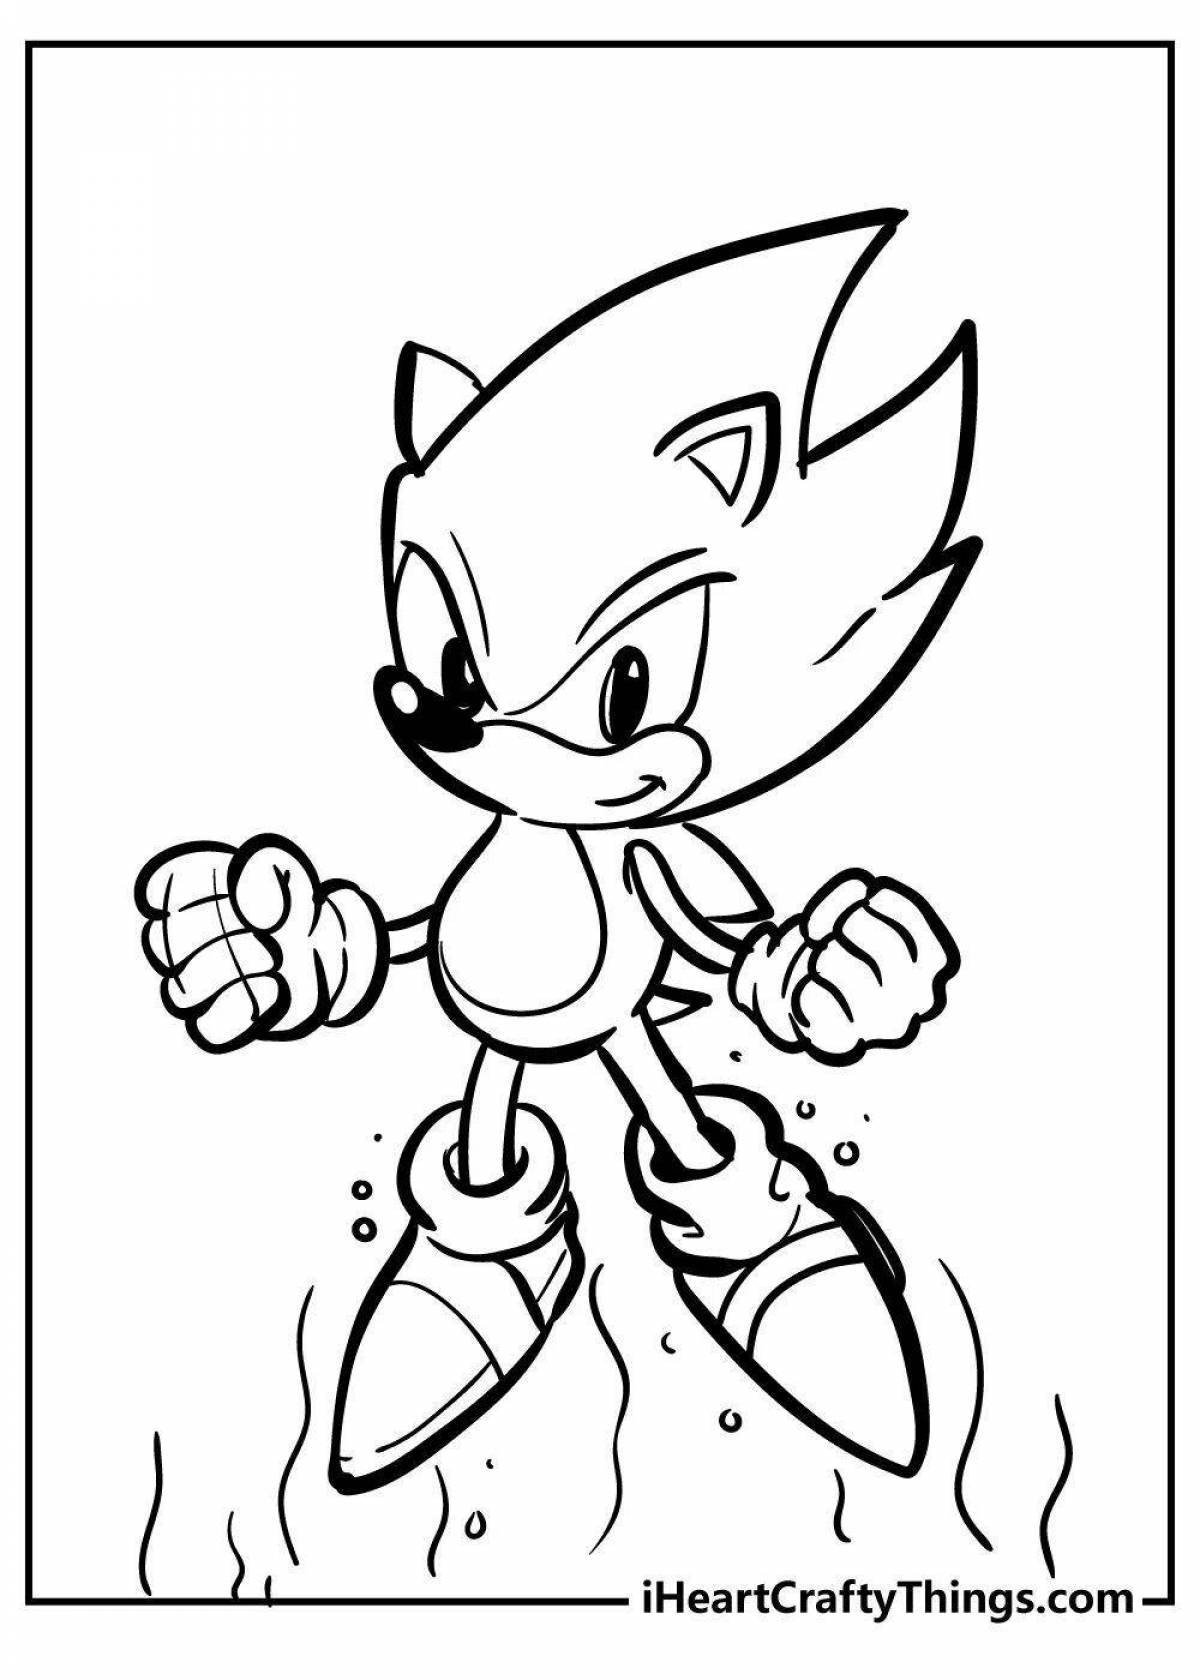 Colorful sonic theos coloring book